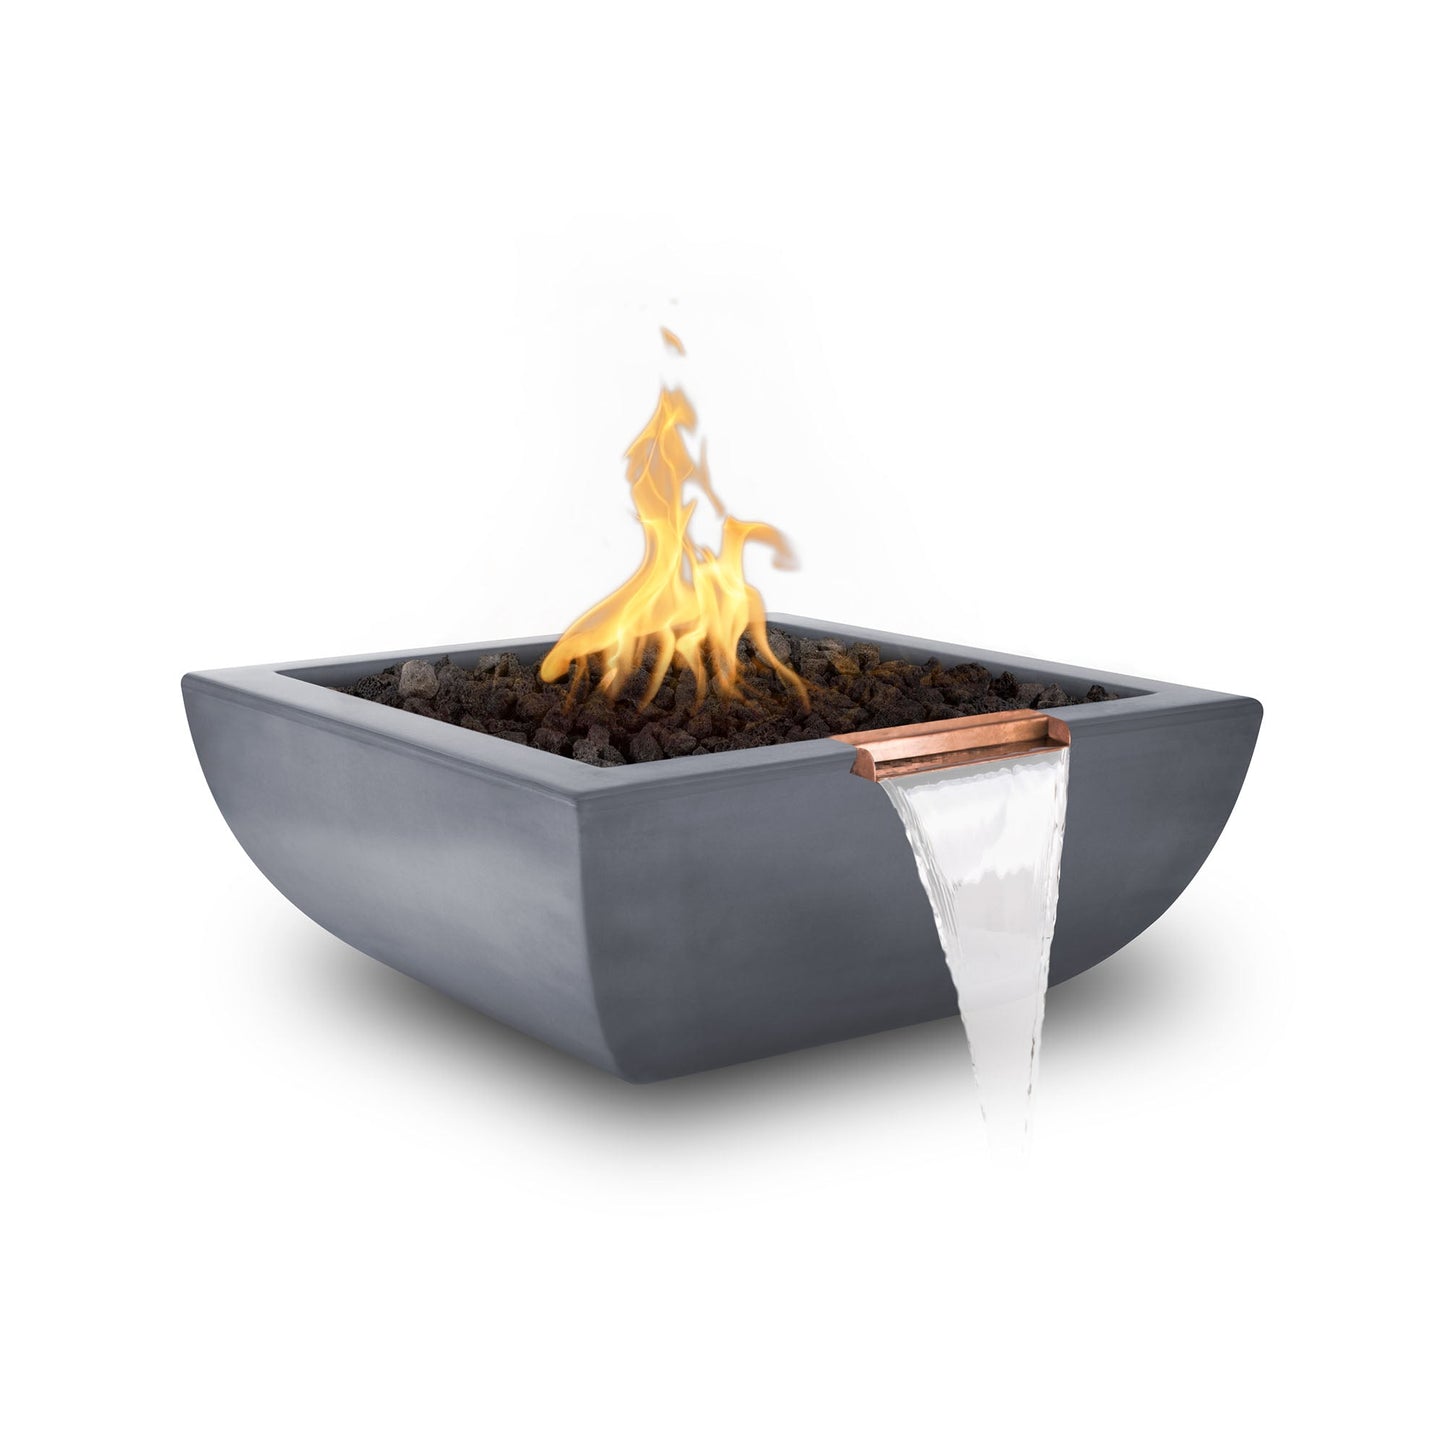 The Outdoor Plus Square Avalon 36" Metallic Pearl GFRC Concrete Natural Gas Fire & Water Bowl with Match Lit with Flame Sense Ignition